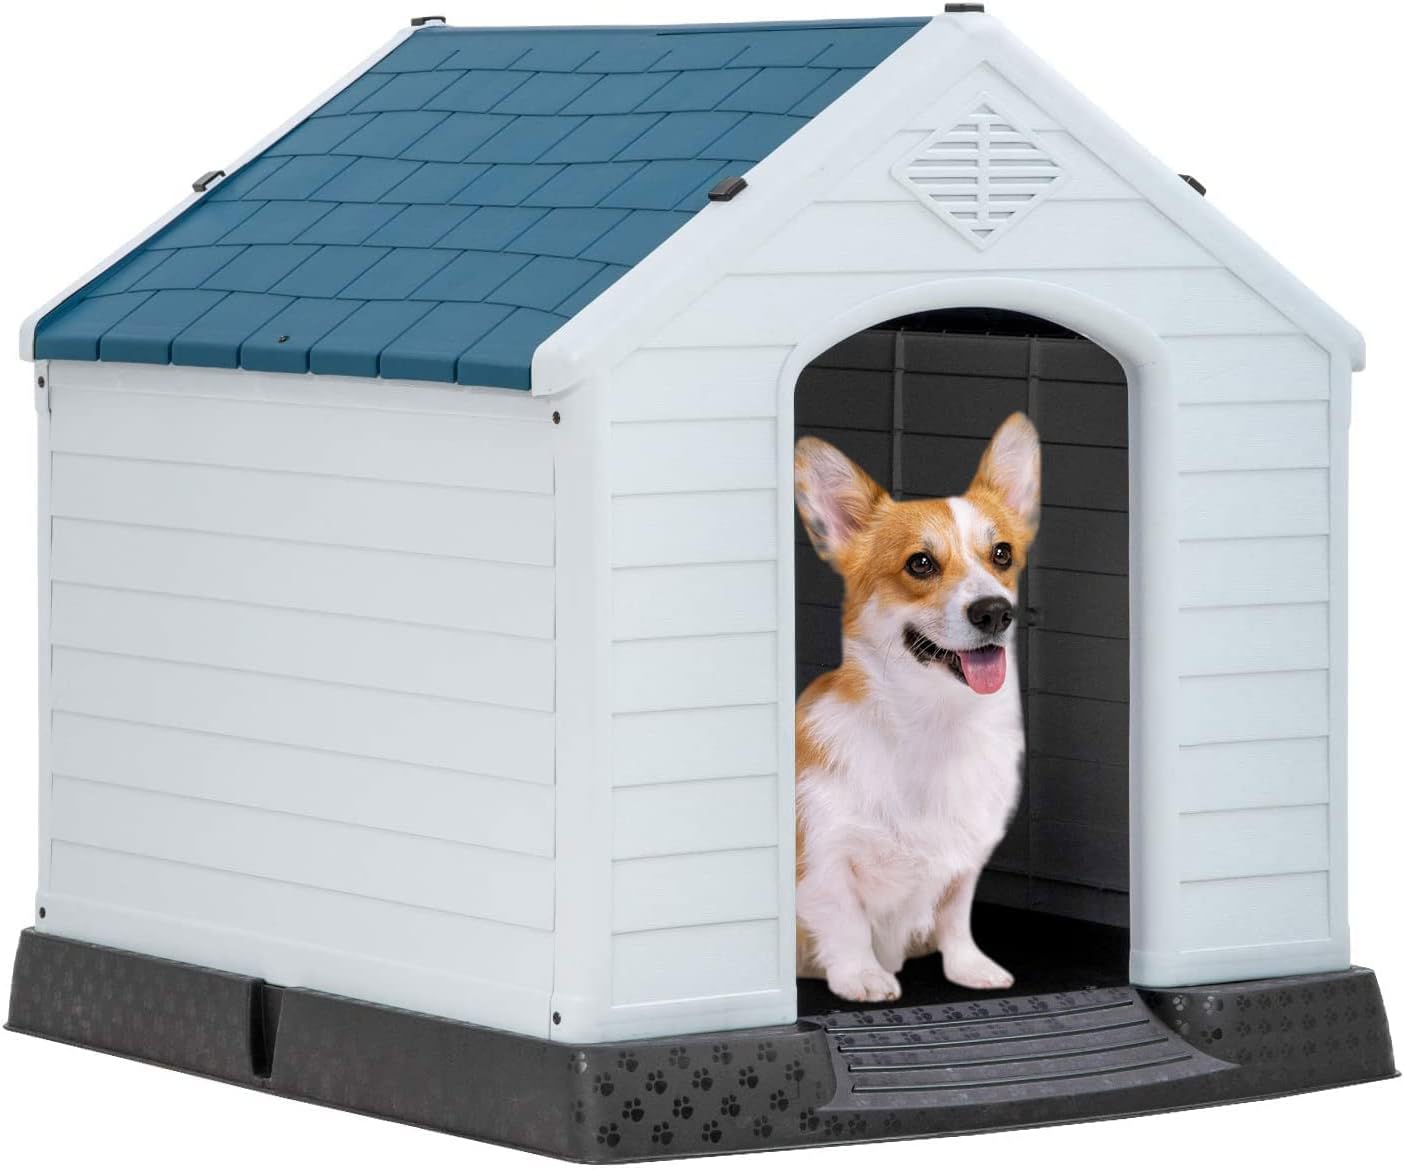 BestPet 32Inch Large Dog House Insulated Kennel Durable Plastic Dog House